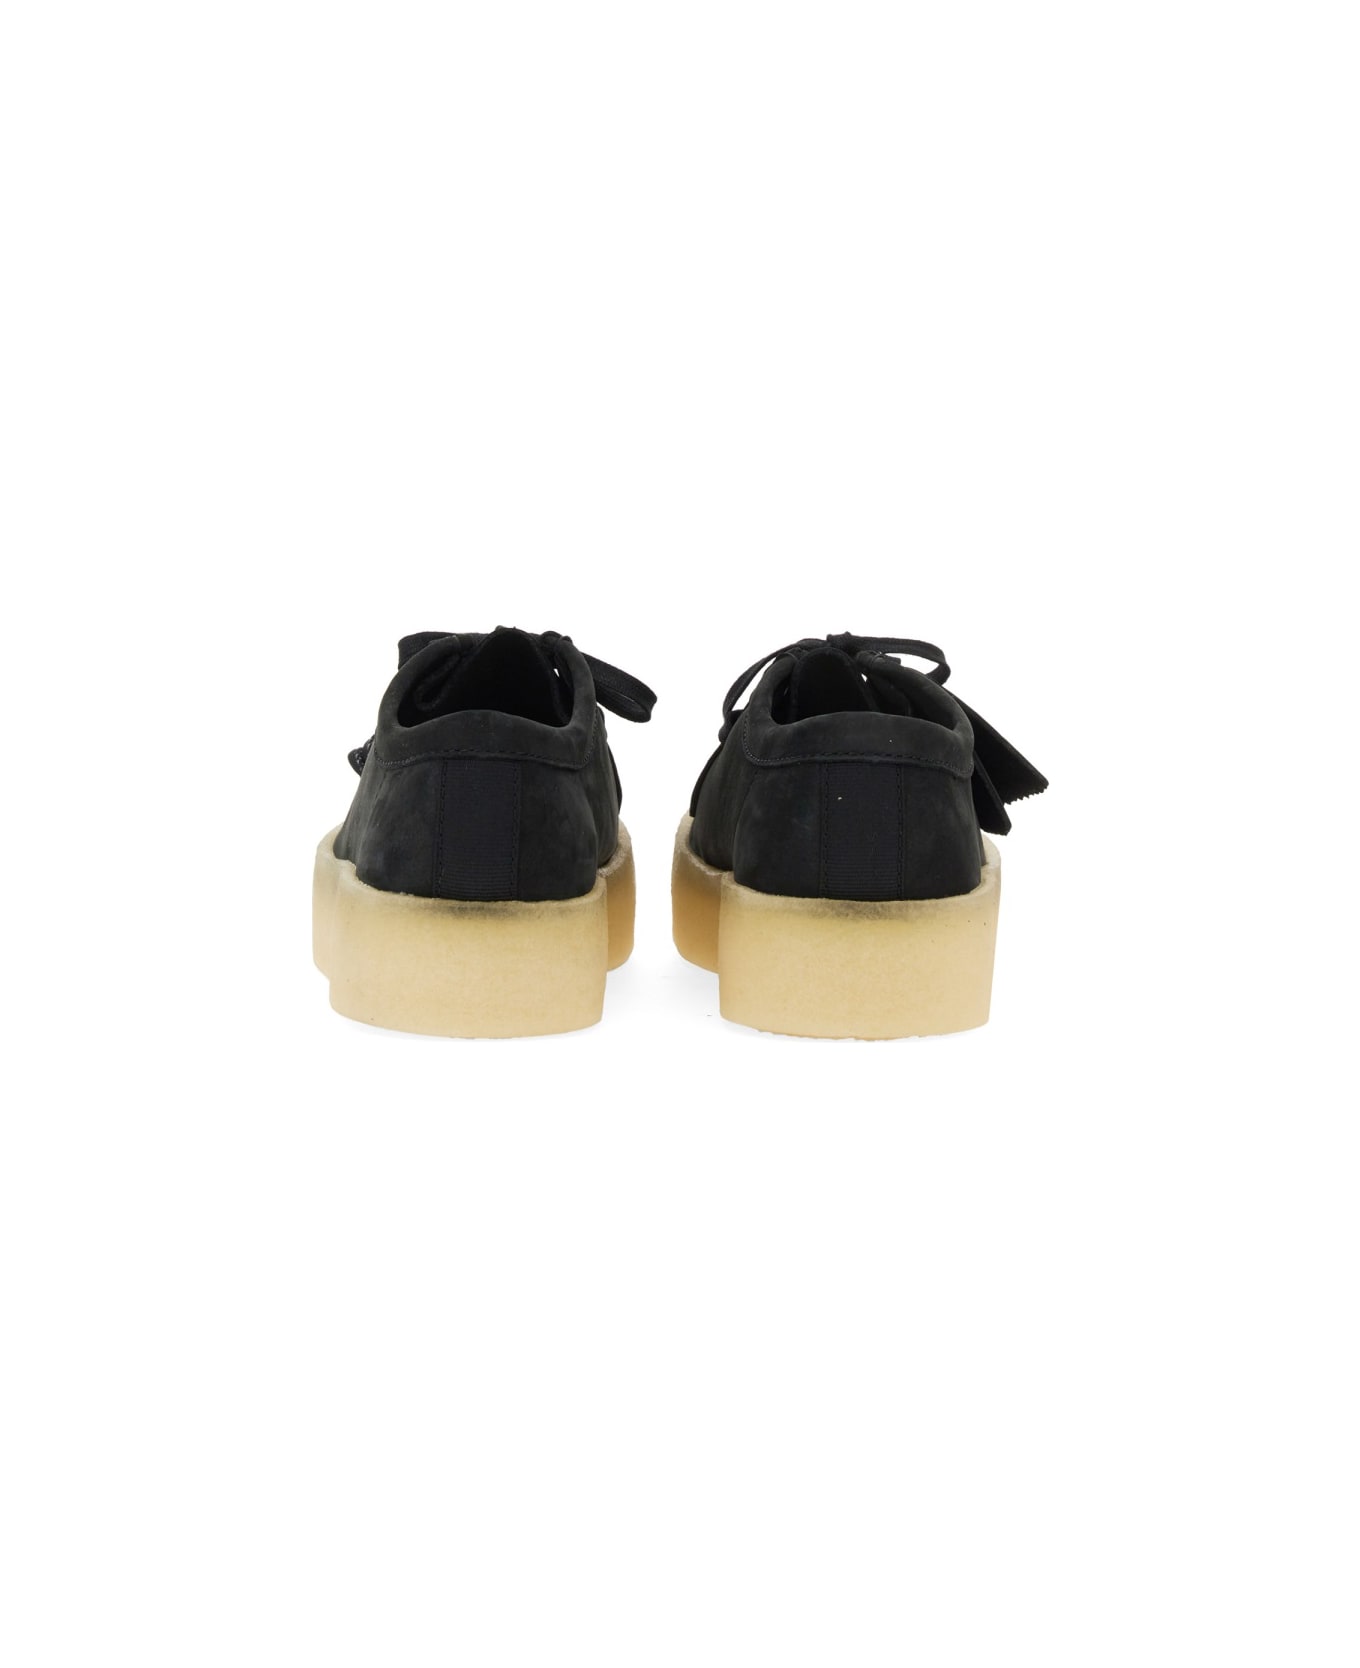 Clarks Moccasin Wallabee Cup - BLACK レースアップシューズ